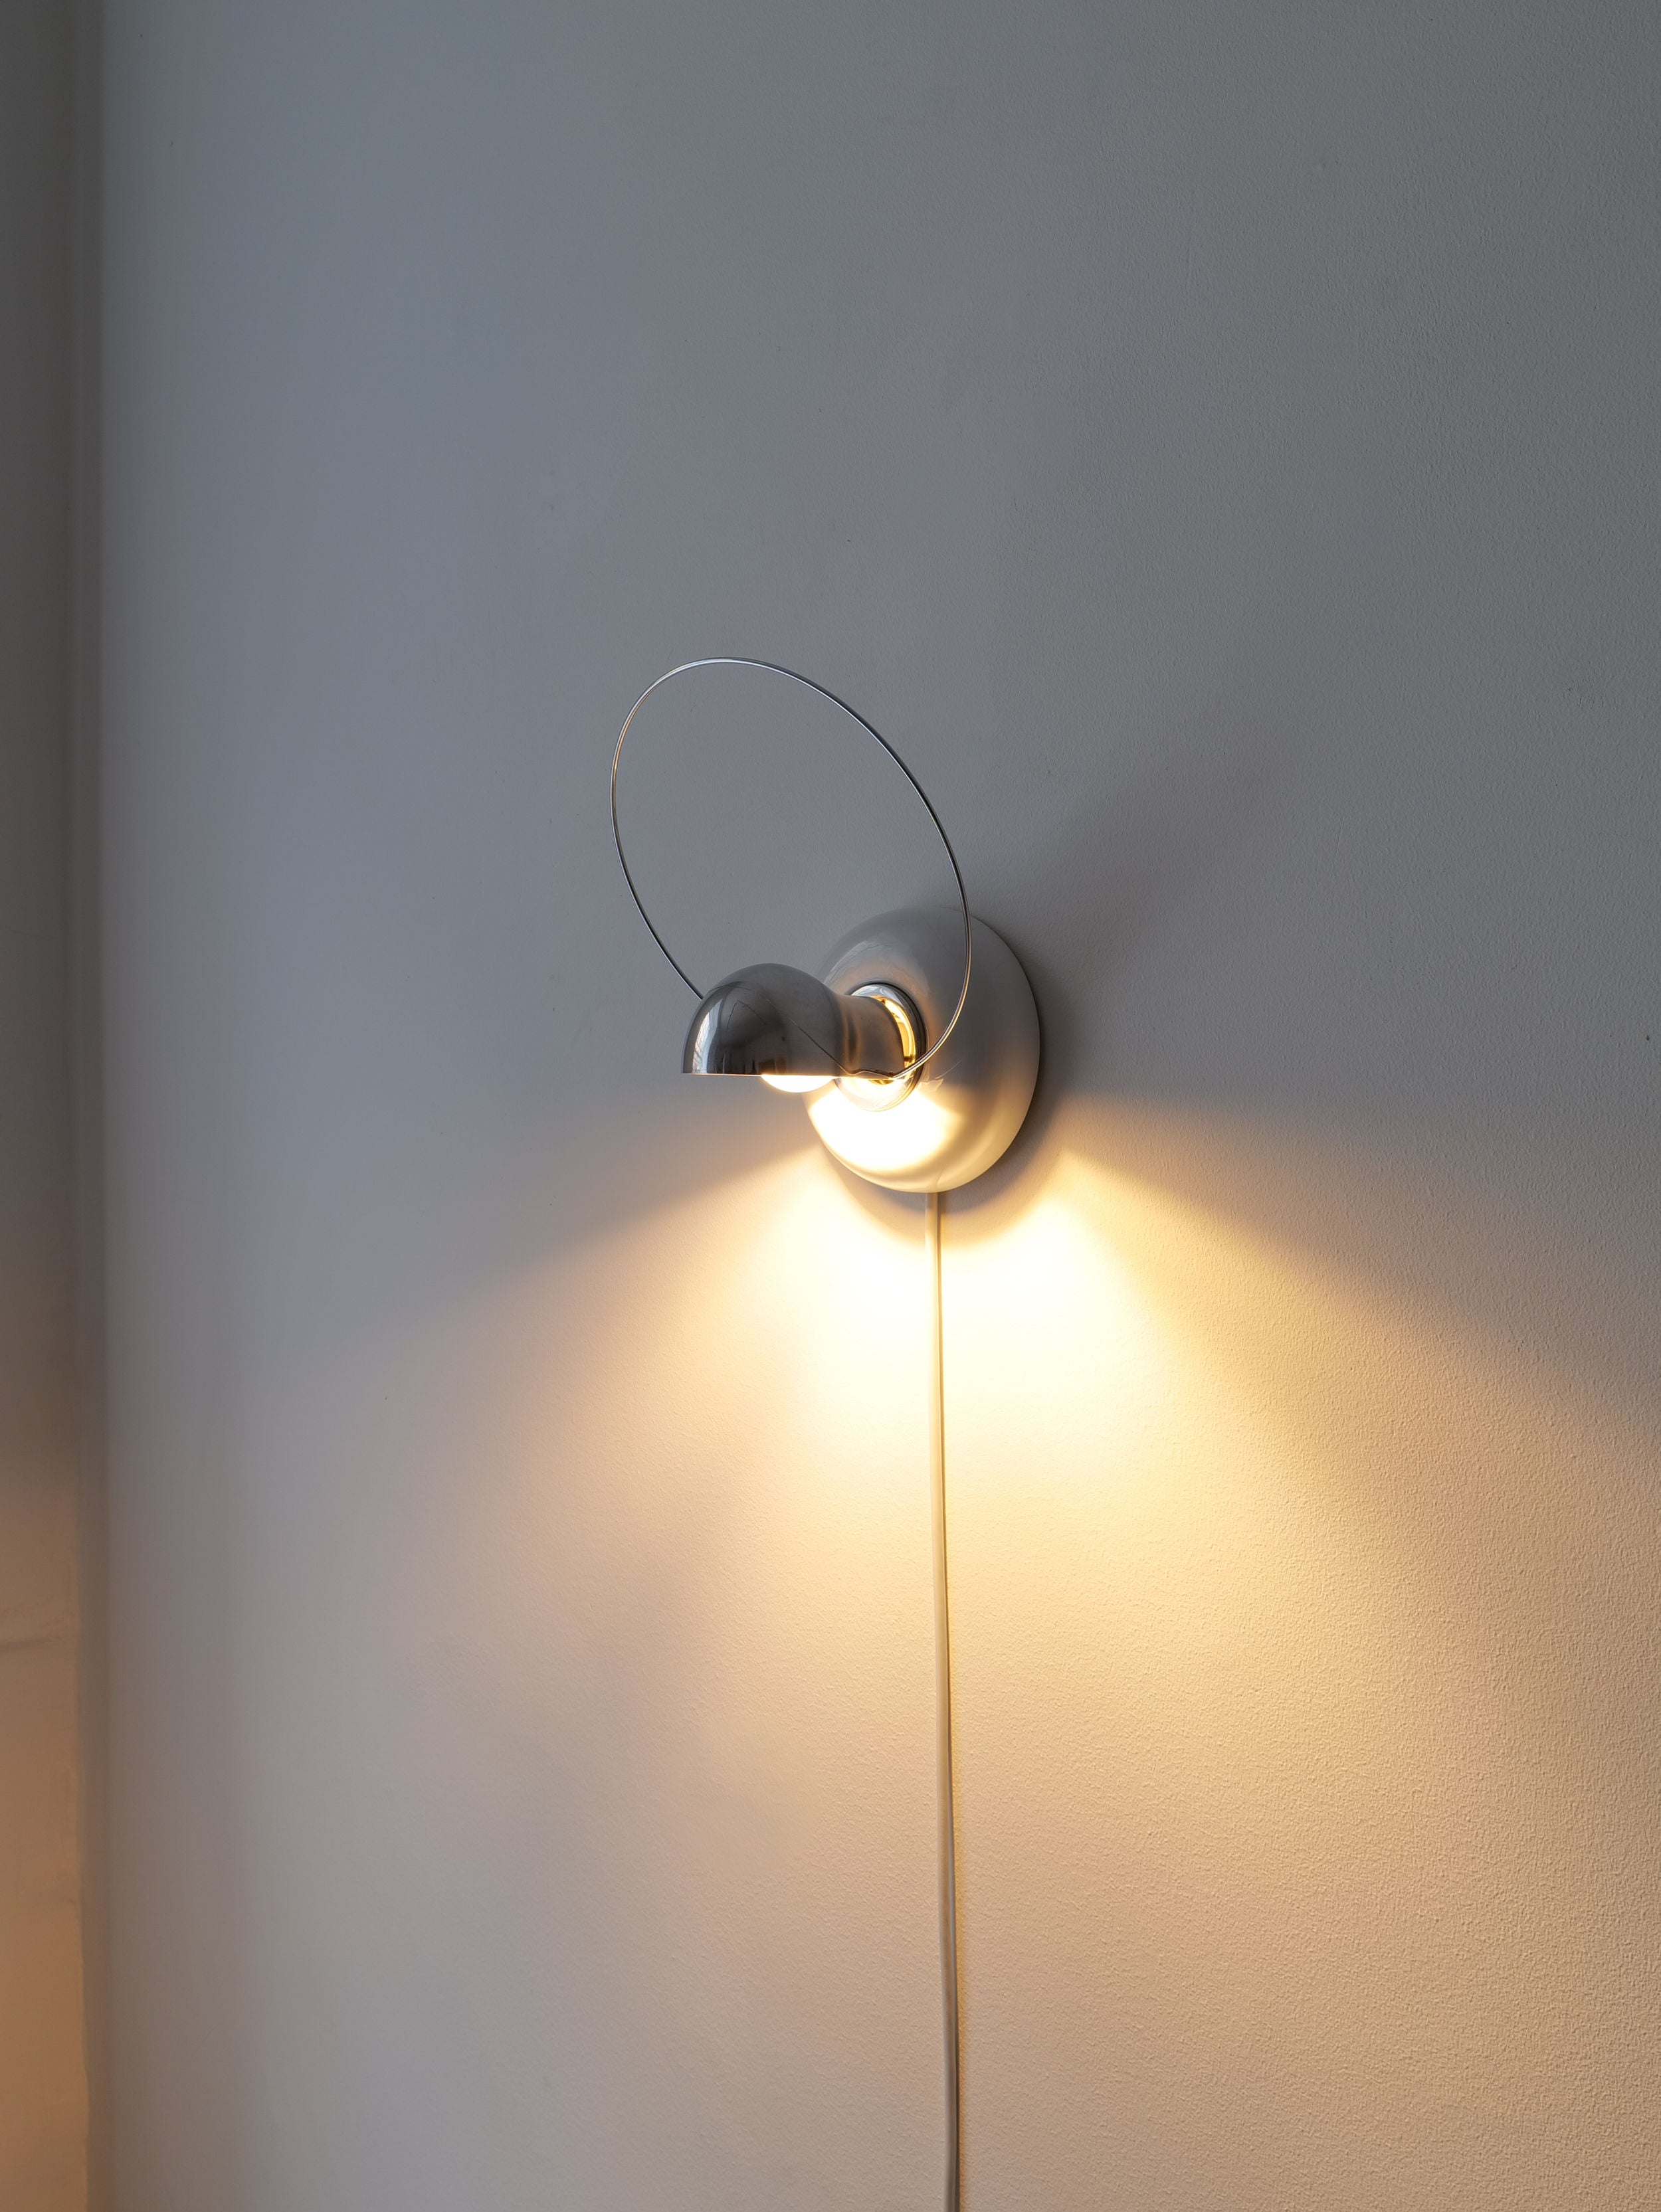 Bisbi Wall Sconces by Achille Castiglioni for a sophisticated lighting solution